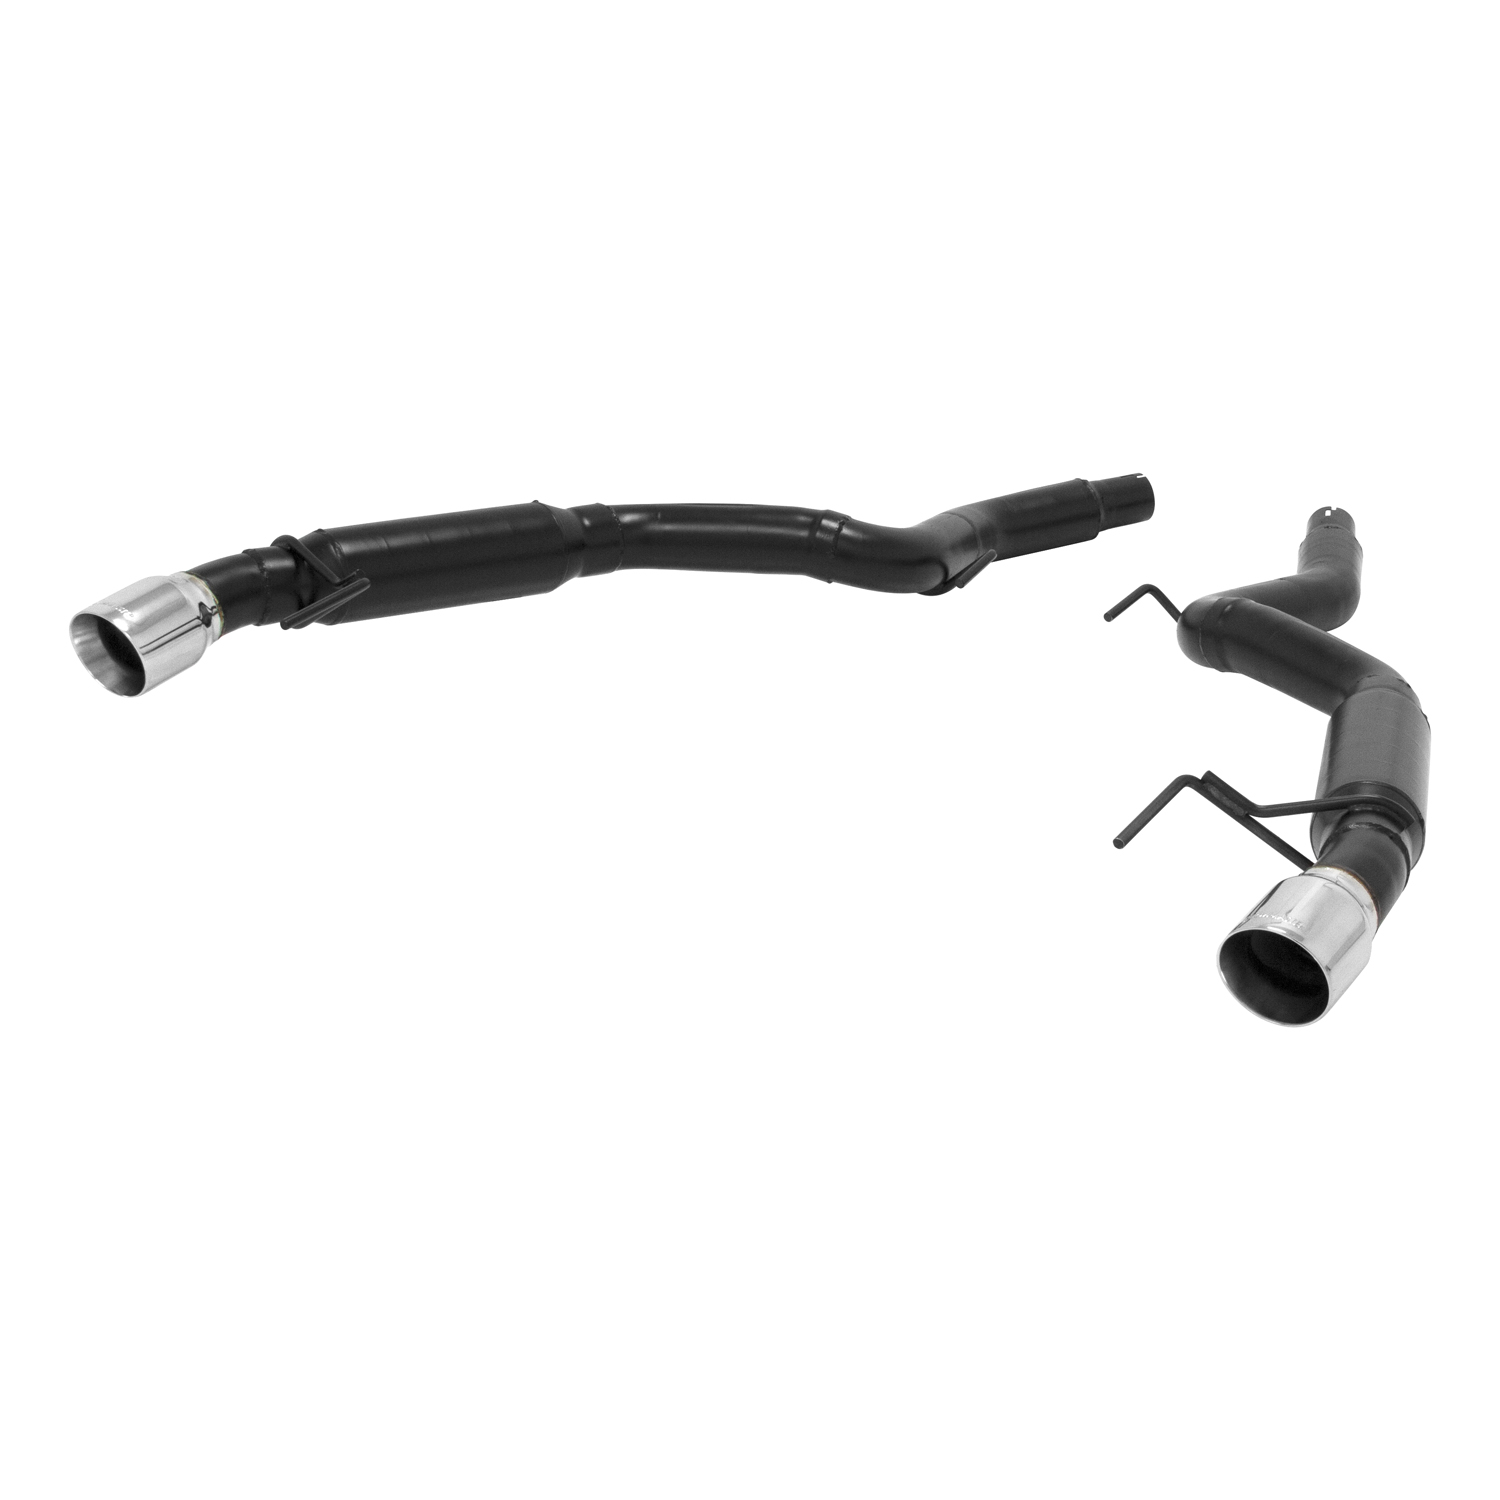 2015-2017 Ford Mustang 2.3L/3.7L Flowmaster Outlaw 409SS Axleback Exhaust System